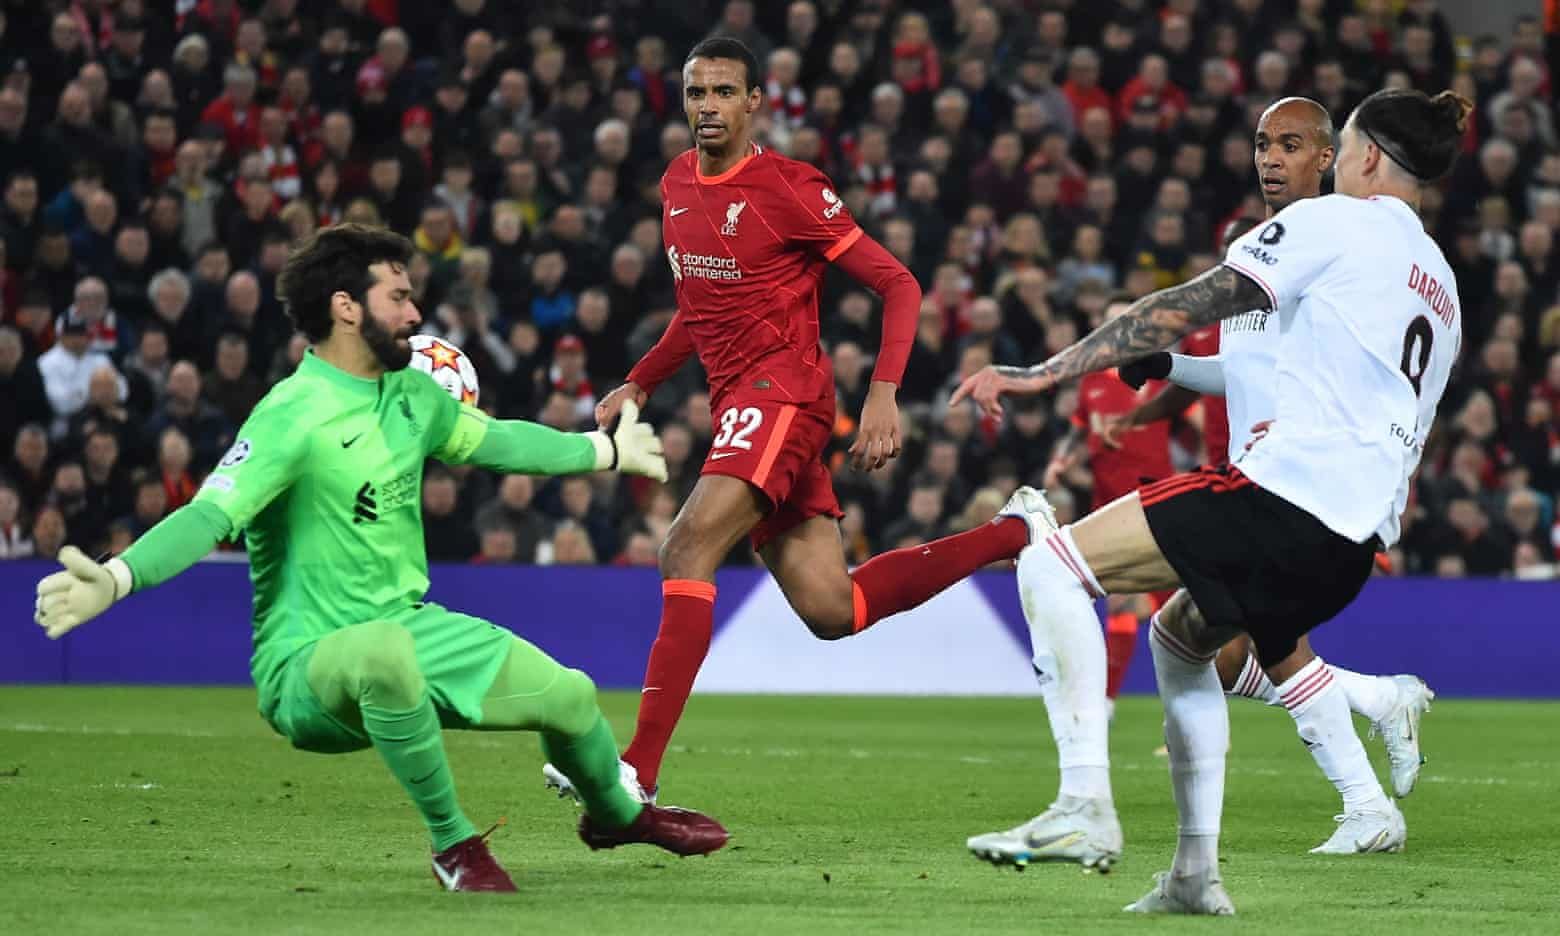 Liverpool to face Villarreal in semi-final after thrilling draw with Benfica